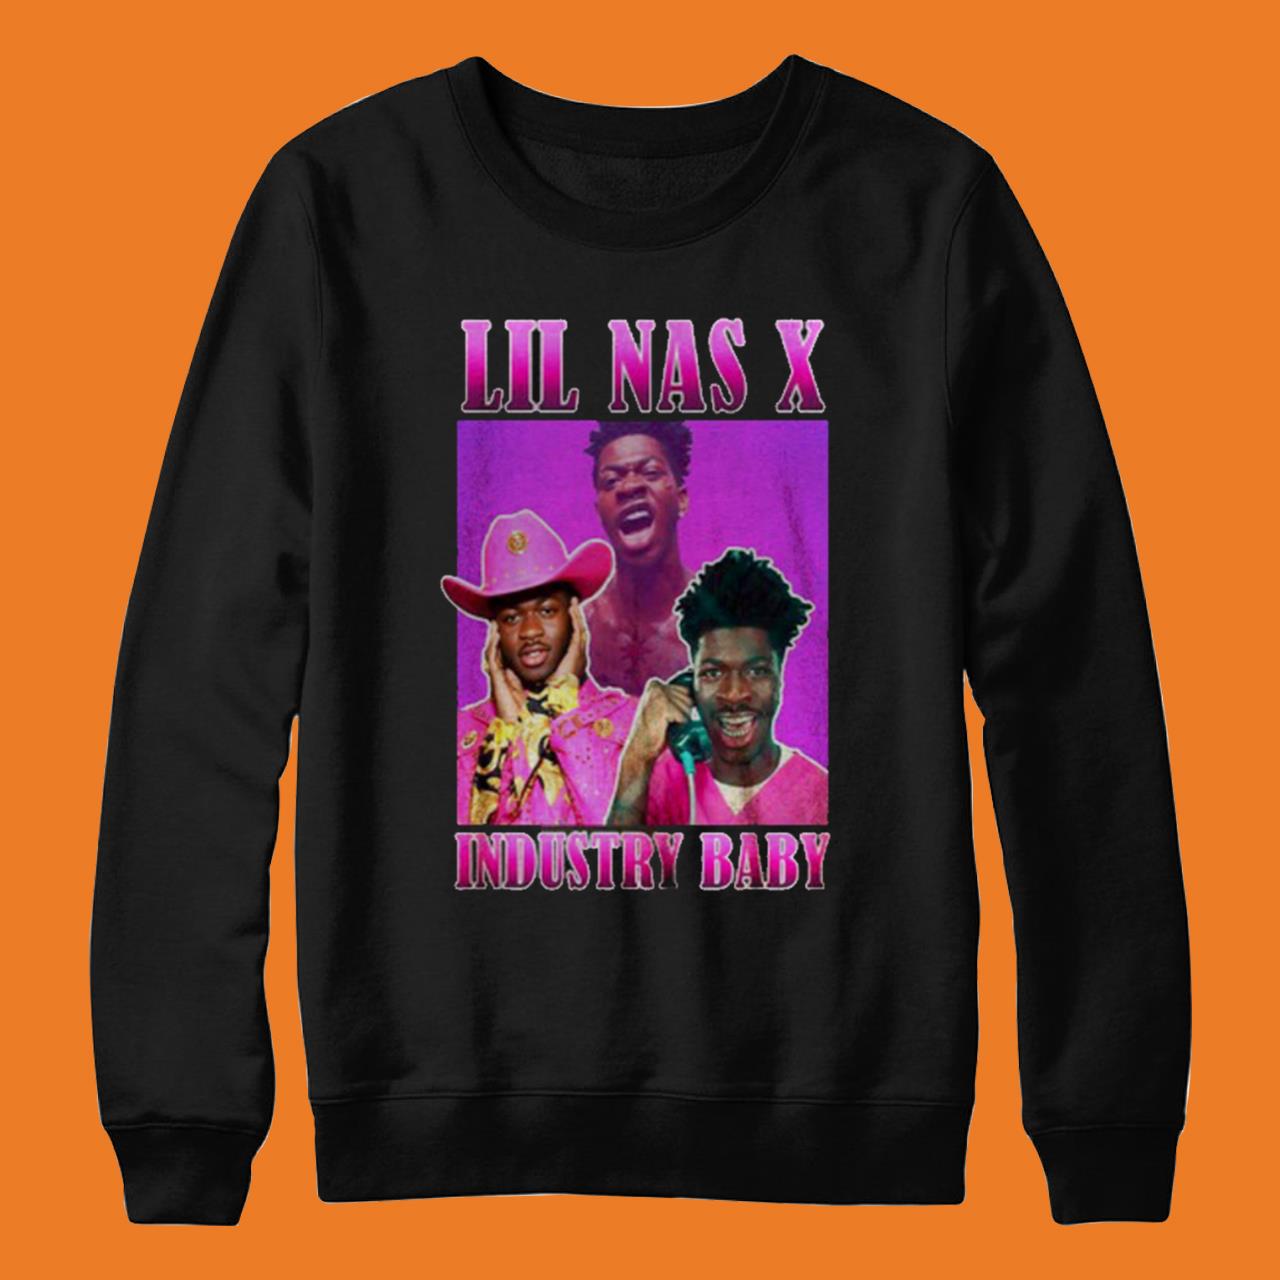 Lil Nas X Industry Baby T-Shirt